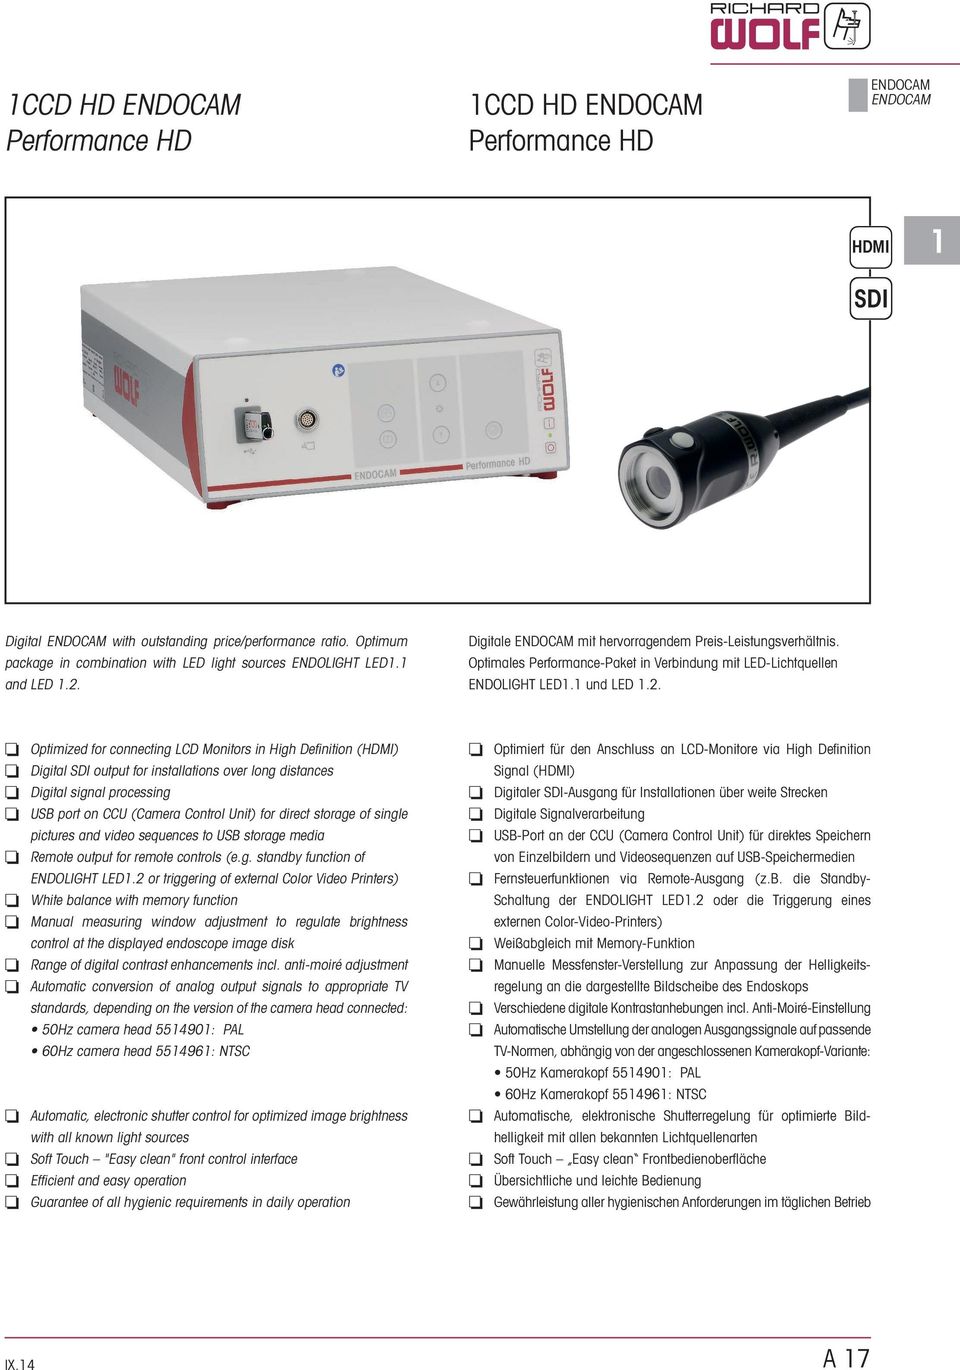 Optimized for connecting LCD Monitors in High Defi nition (HDMI) Digital SDI output for installations over long distances Digital signal processing USB port on CCU (Camera Control Unit) for direct